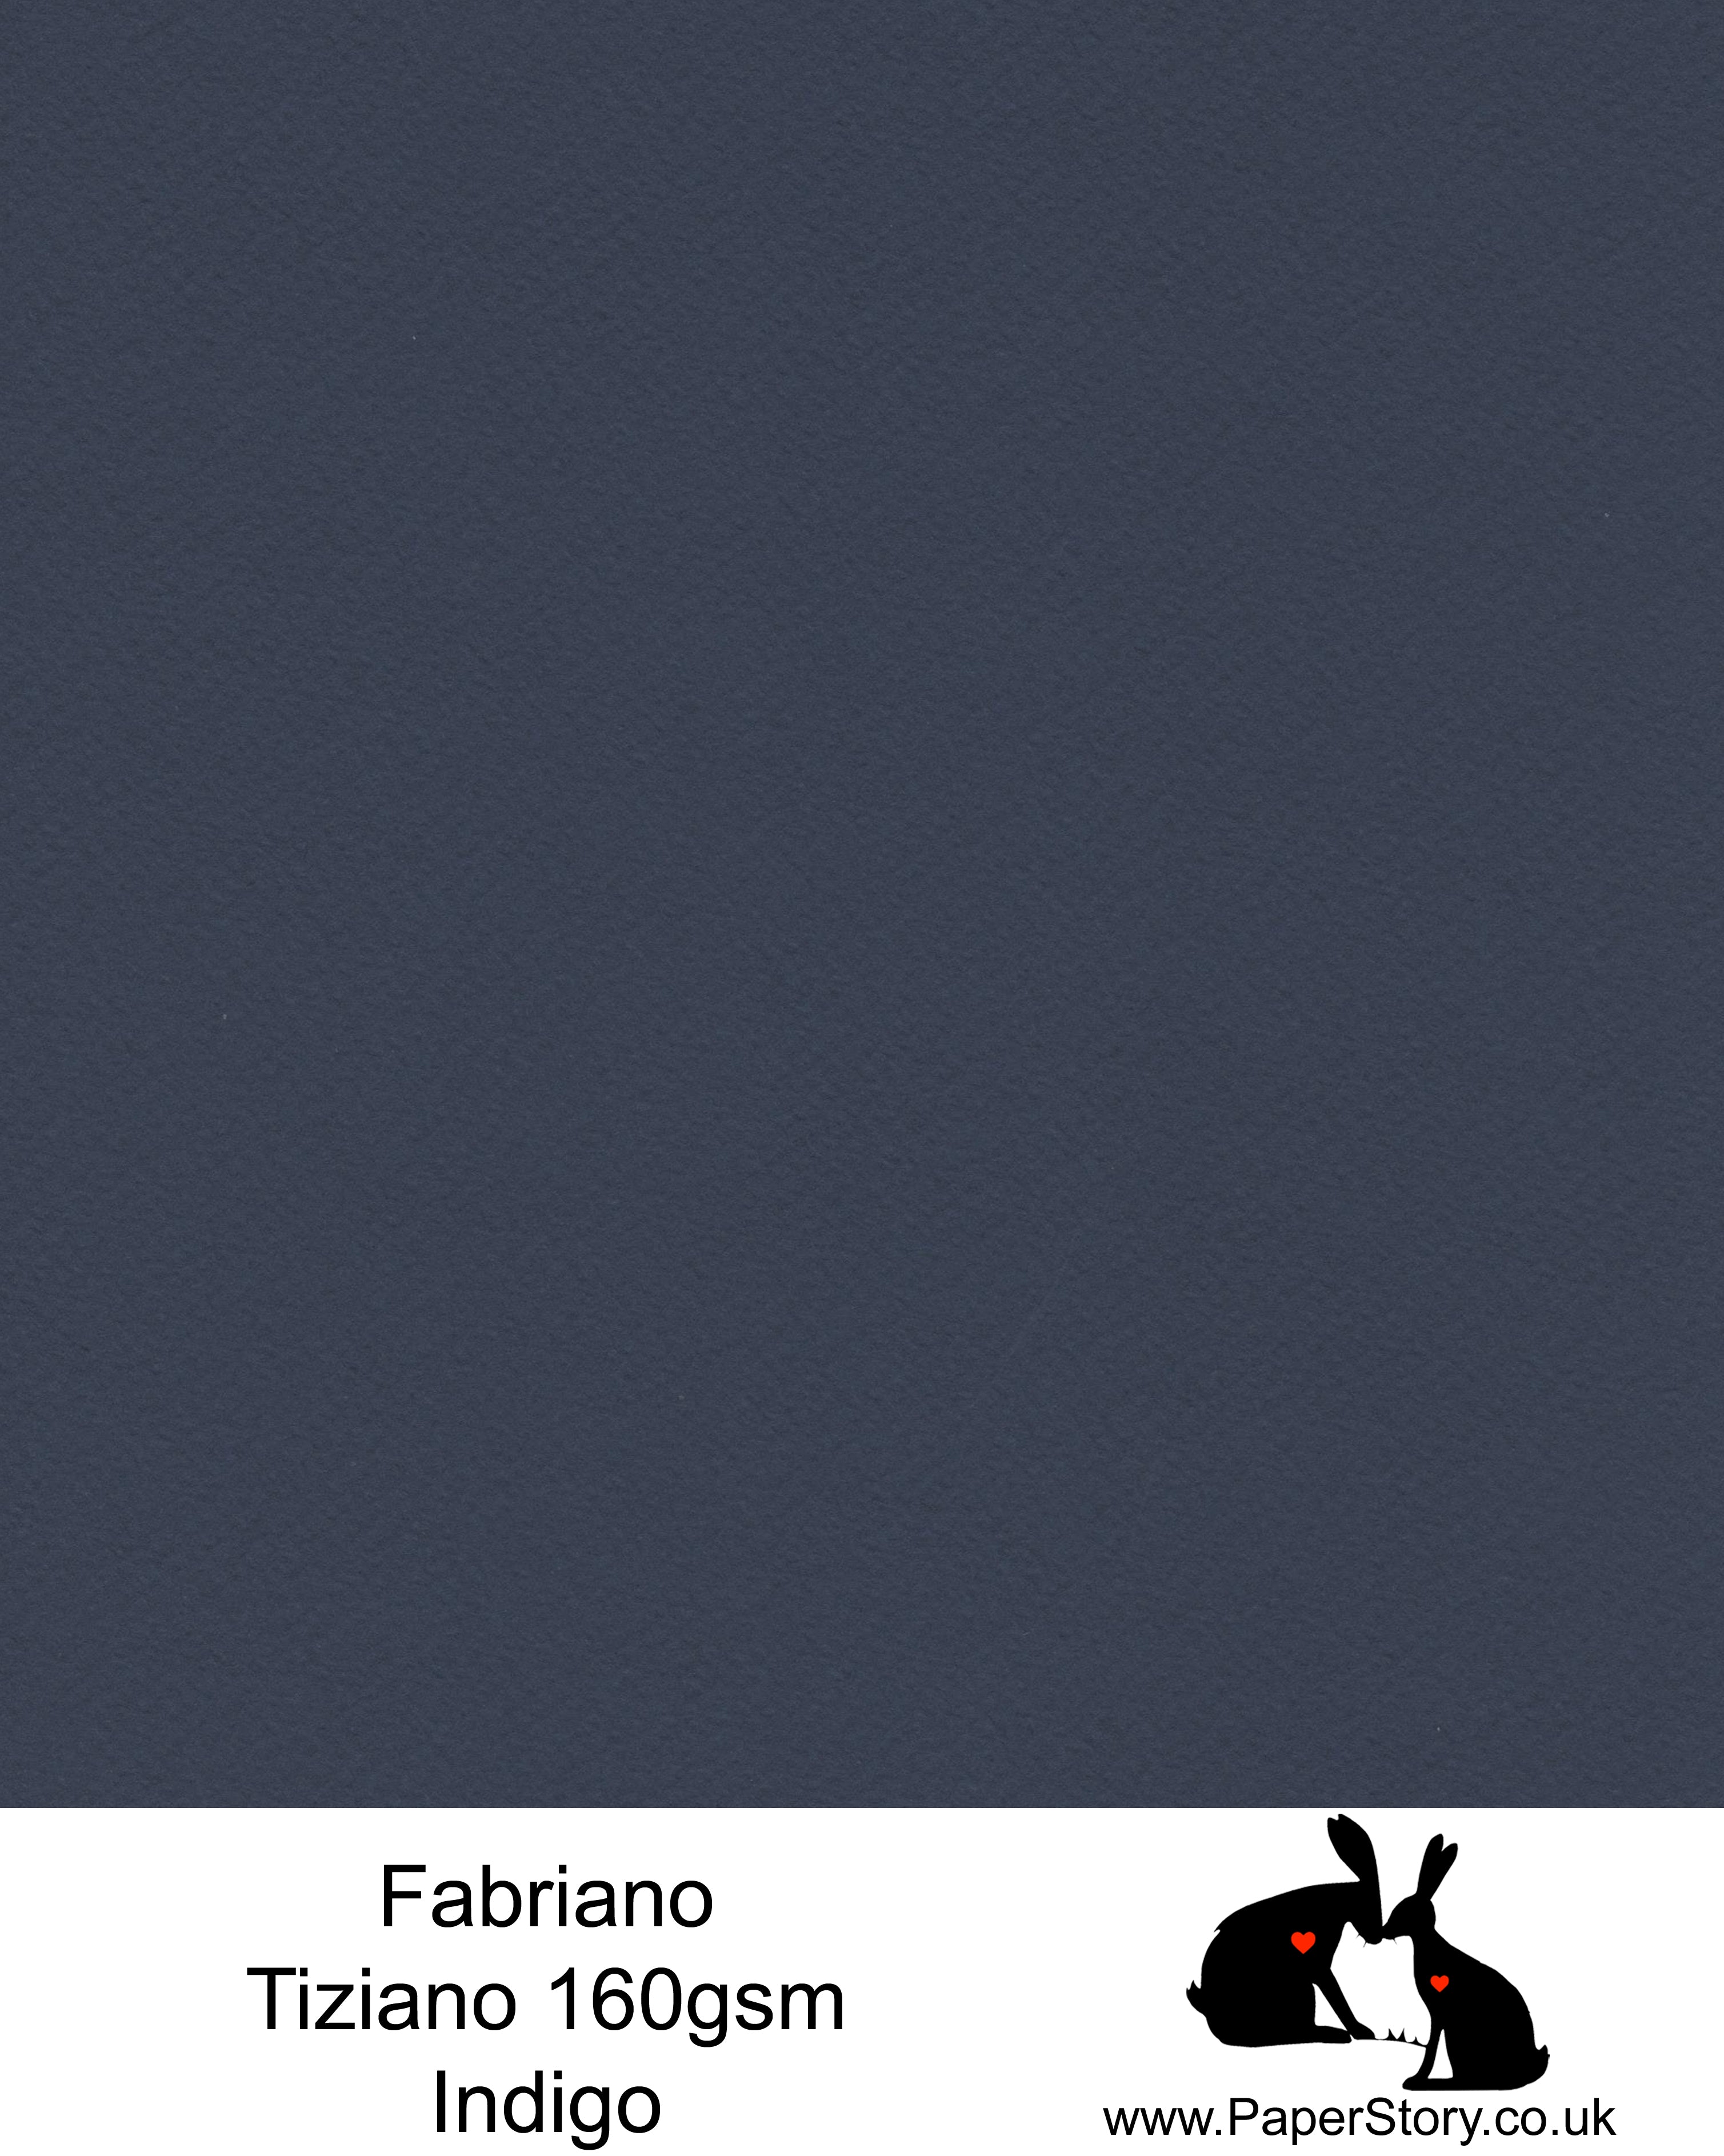 High quality paper from Italy, Indigo deep Navy blue Fabriano Tiziano is 160 gsm, Tiziano has a high cotton content, a textured naturally sized surface. This paper is acid free to guarantee long permanence in time, pH neutral. It has highly lightfast colours, an excellent surface making and sizing which make this paper particularly suitable for papercutting, pastels, pencil, graphite, charcoal, tempera, air brush and watercolour techniques. Tiziano can be used for all printing techniques.